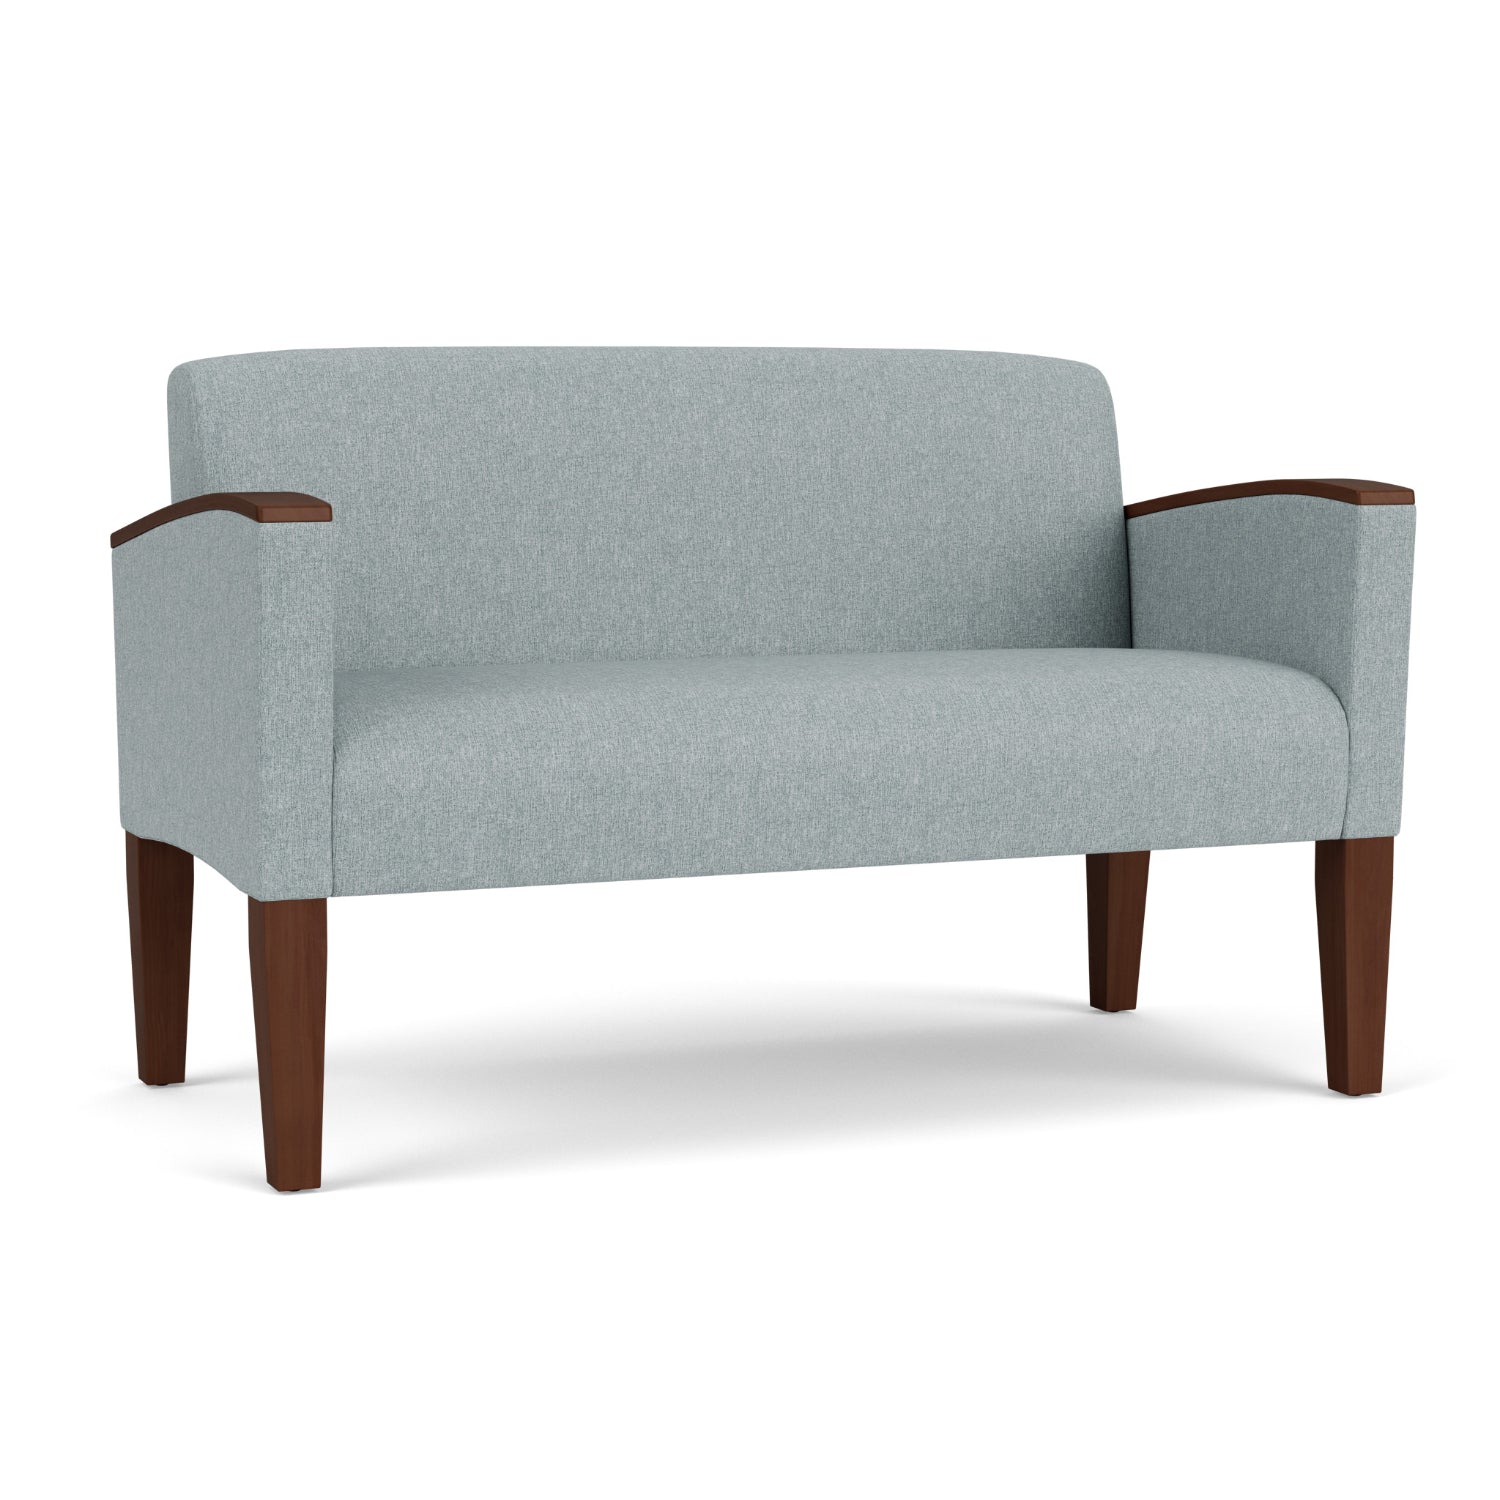 Belmont Collection Reception Seating, Loveseat, Healthcare Vinyl Upholstery, FREE SHIPPING